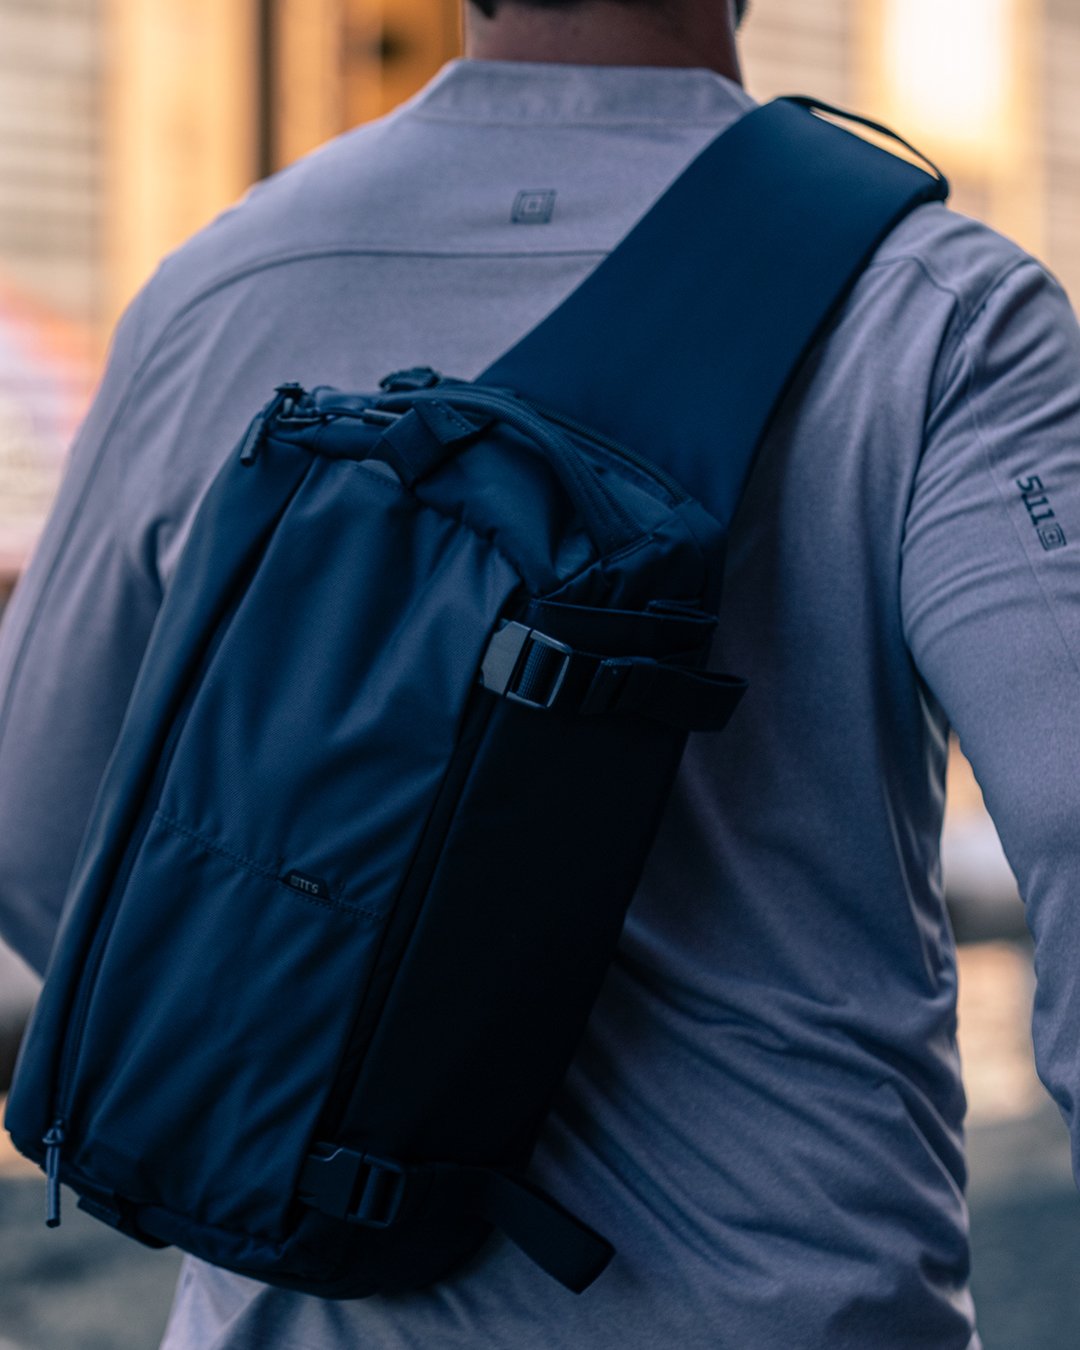 5.11 Tactical on X: You think a 5.11 sling pack isn't for you